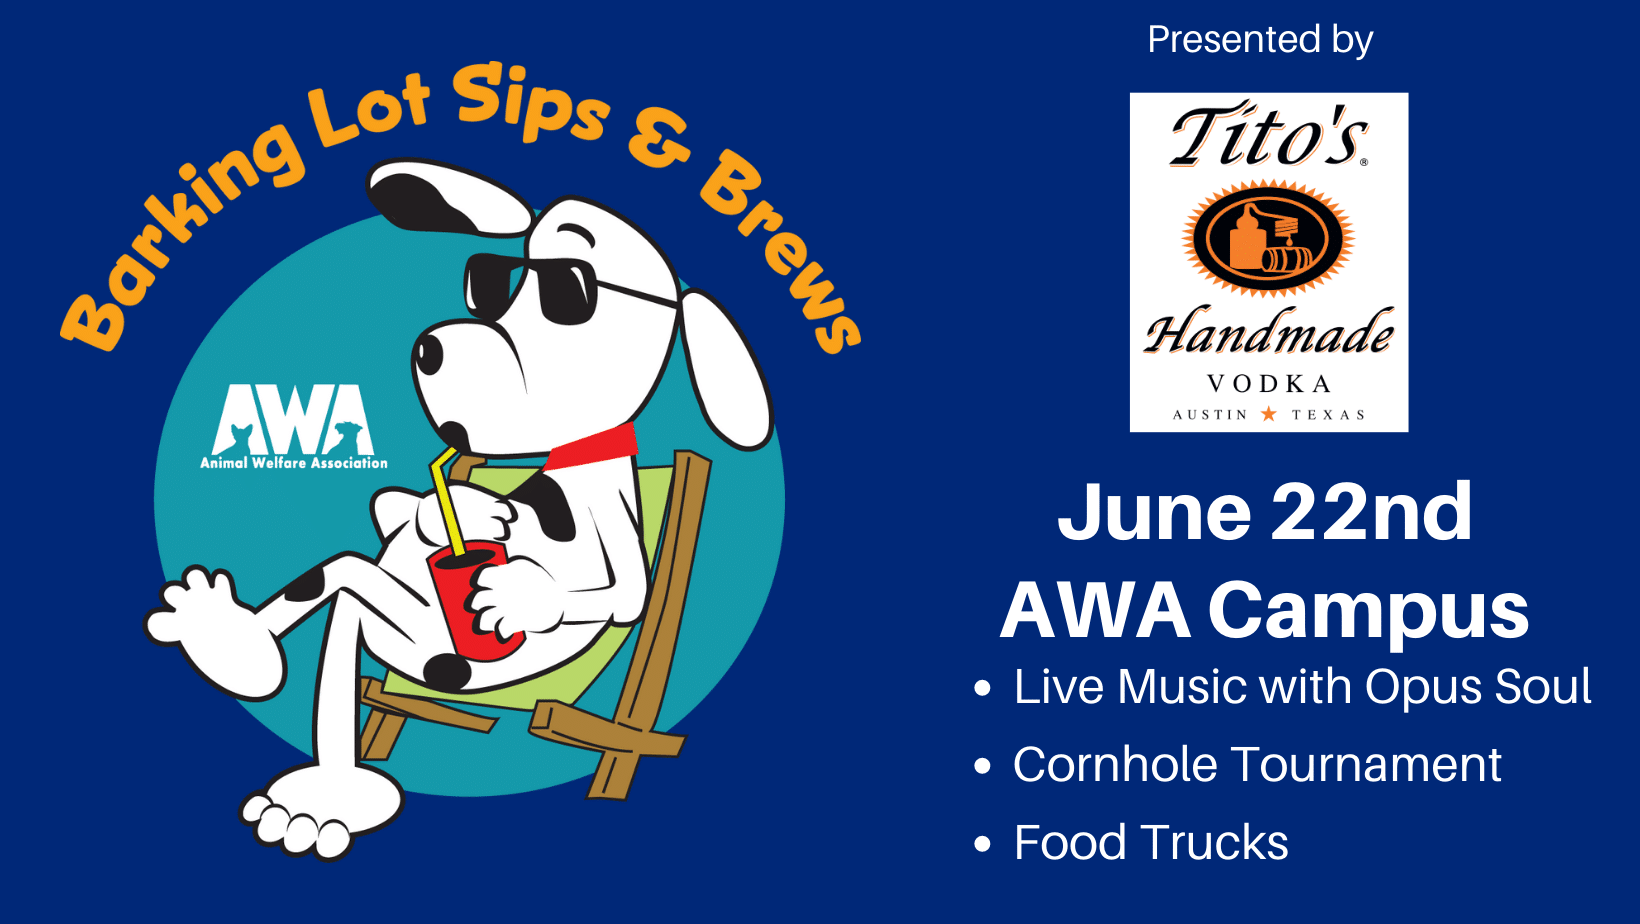 dog sitting on chair with drink on flyer for AWA's Barking lot Sips and Brews event.